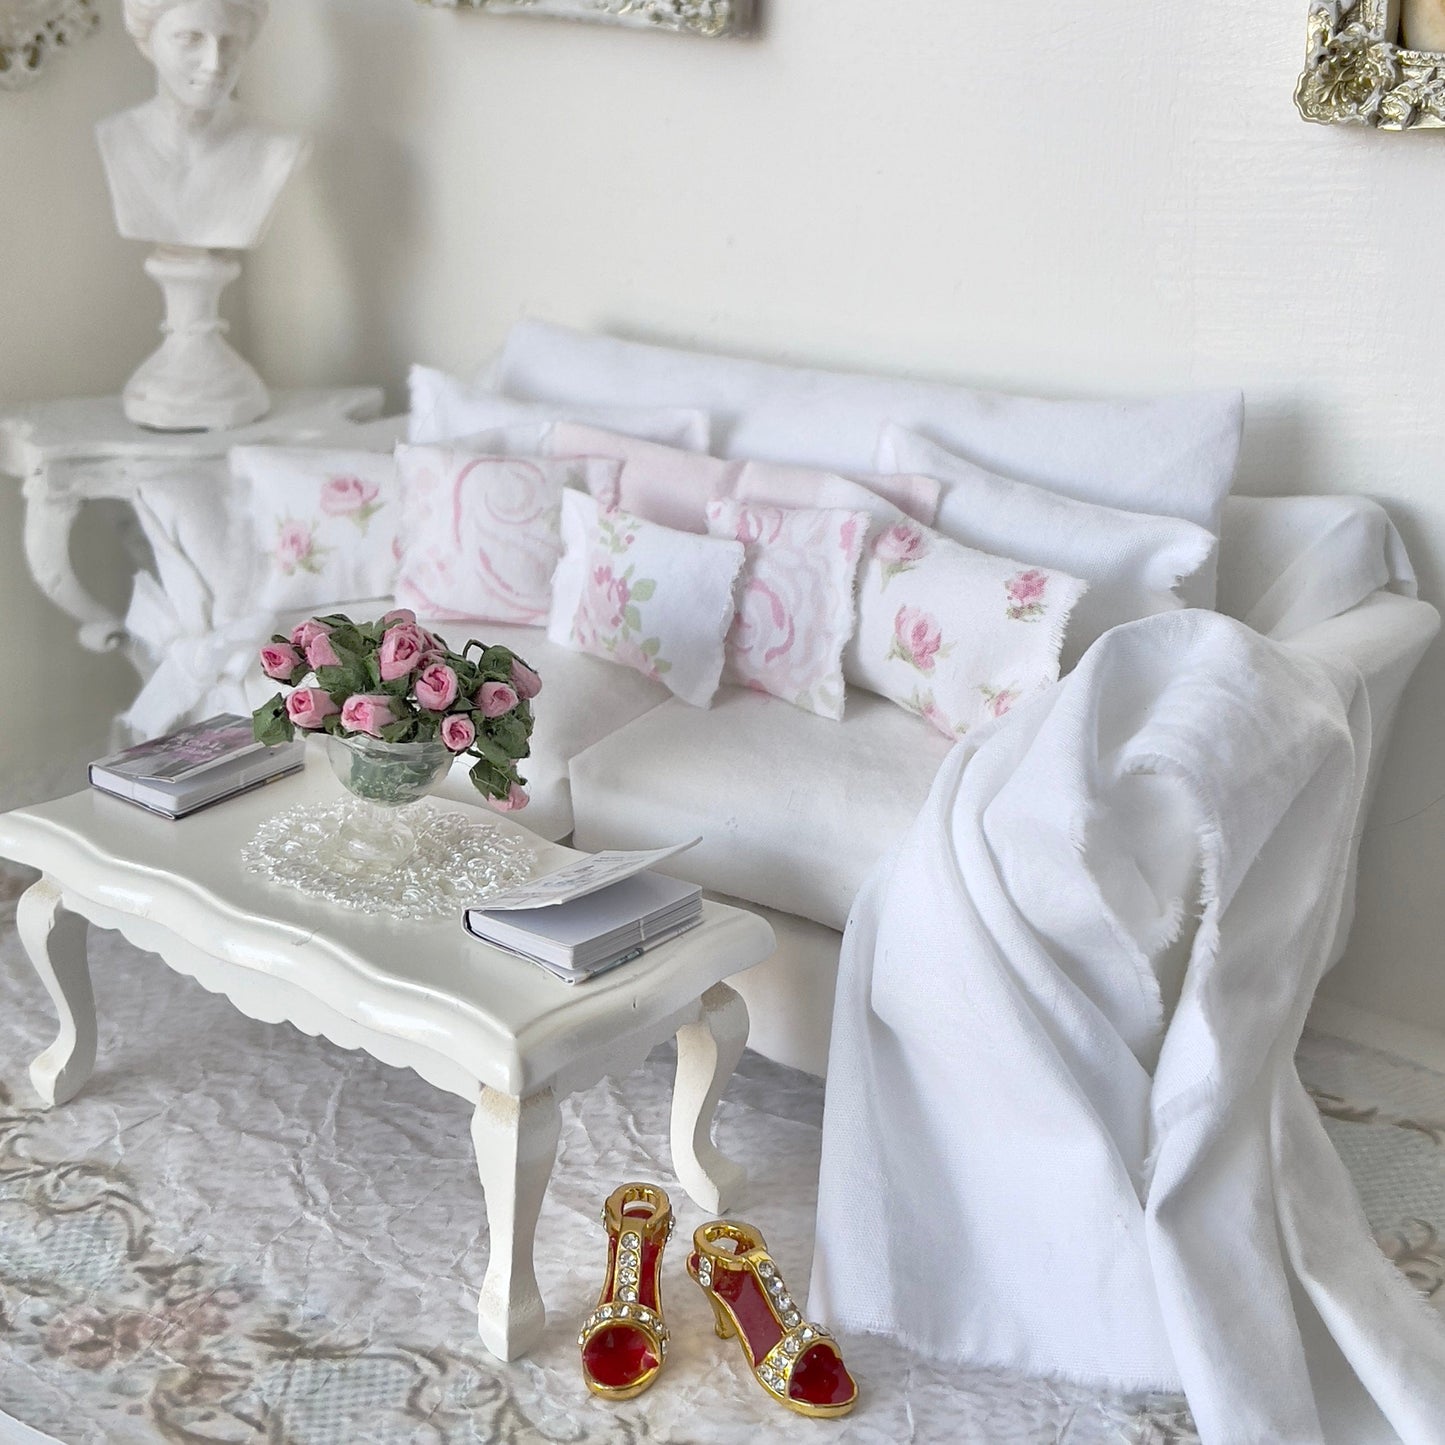 CHANTALLENA Pillow Set | Shabby Pink Roses and Celery Pillows with Throw- 1:12 scale | Shabby 1